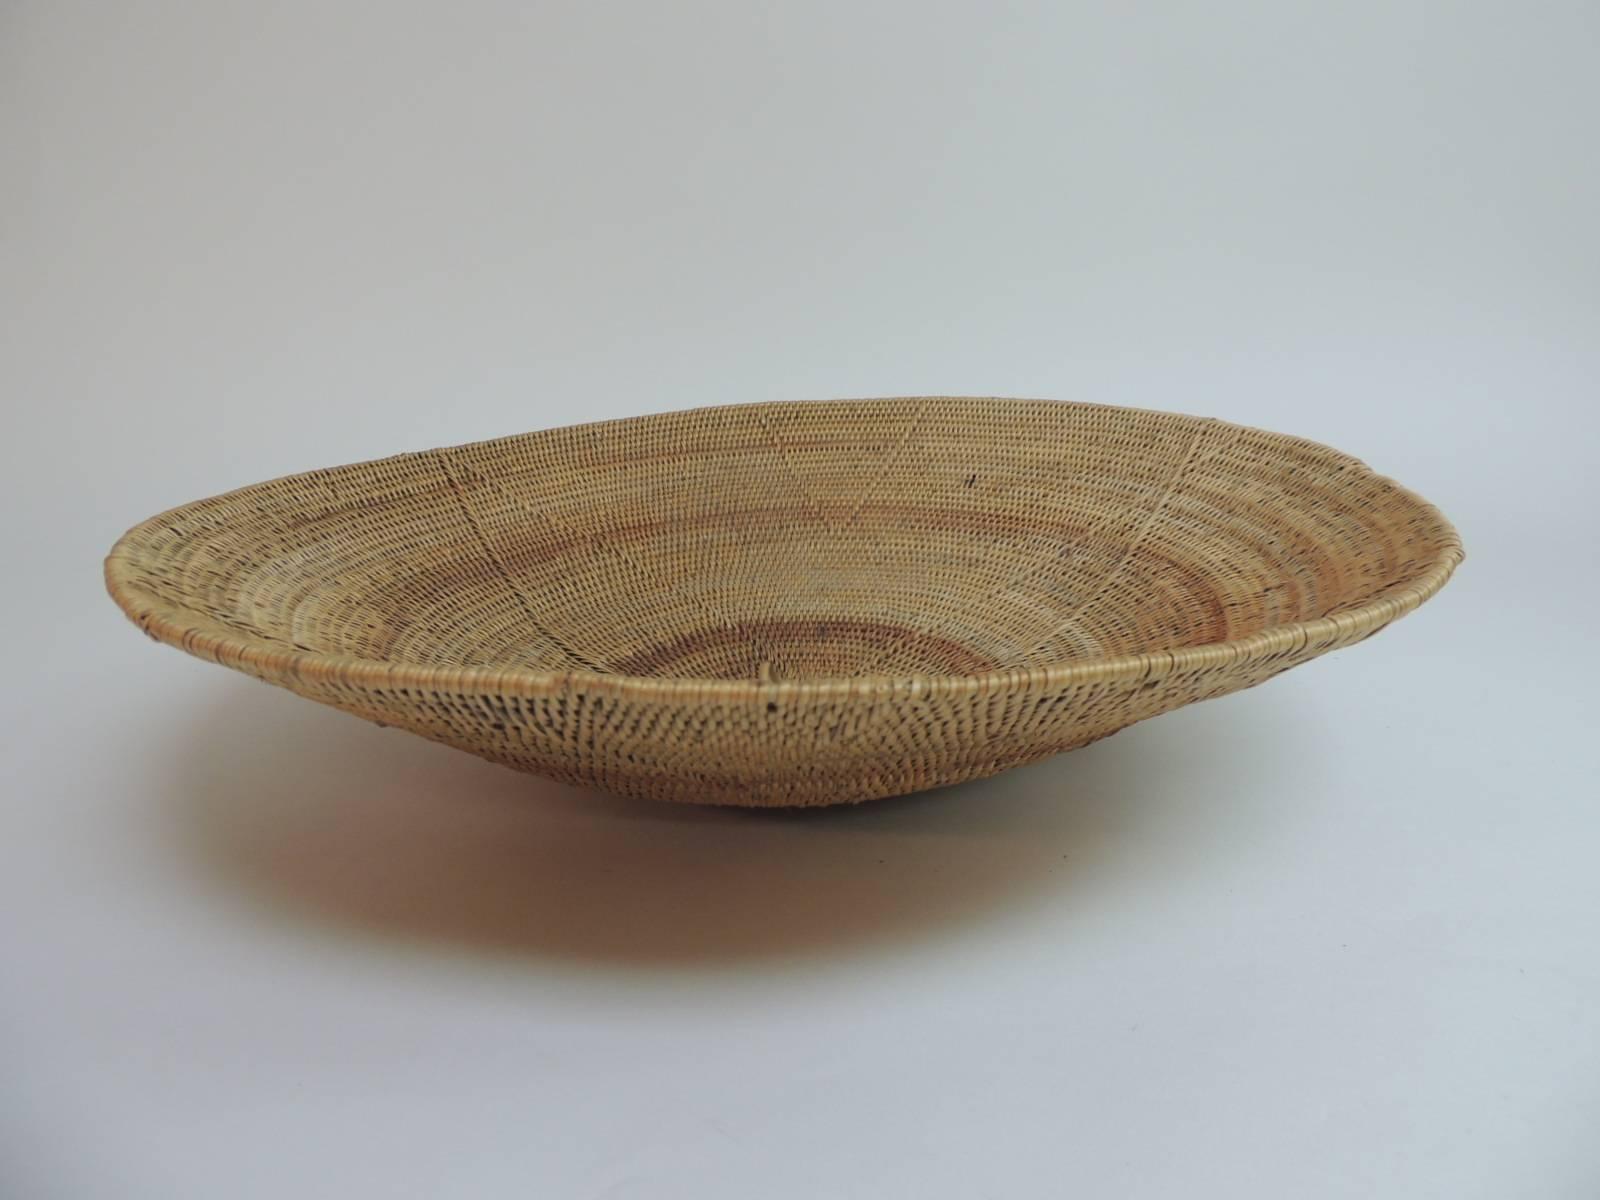 Offered by the Antique Textiles Galleries:
Round vintage seagrass tribal woven African artisanal basket. Not flat-shaped like a bowl.
Swirl intricate design and weave.